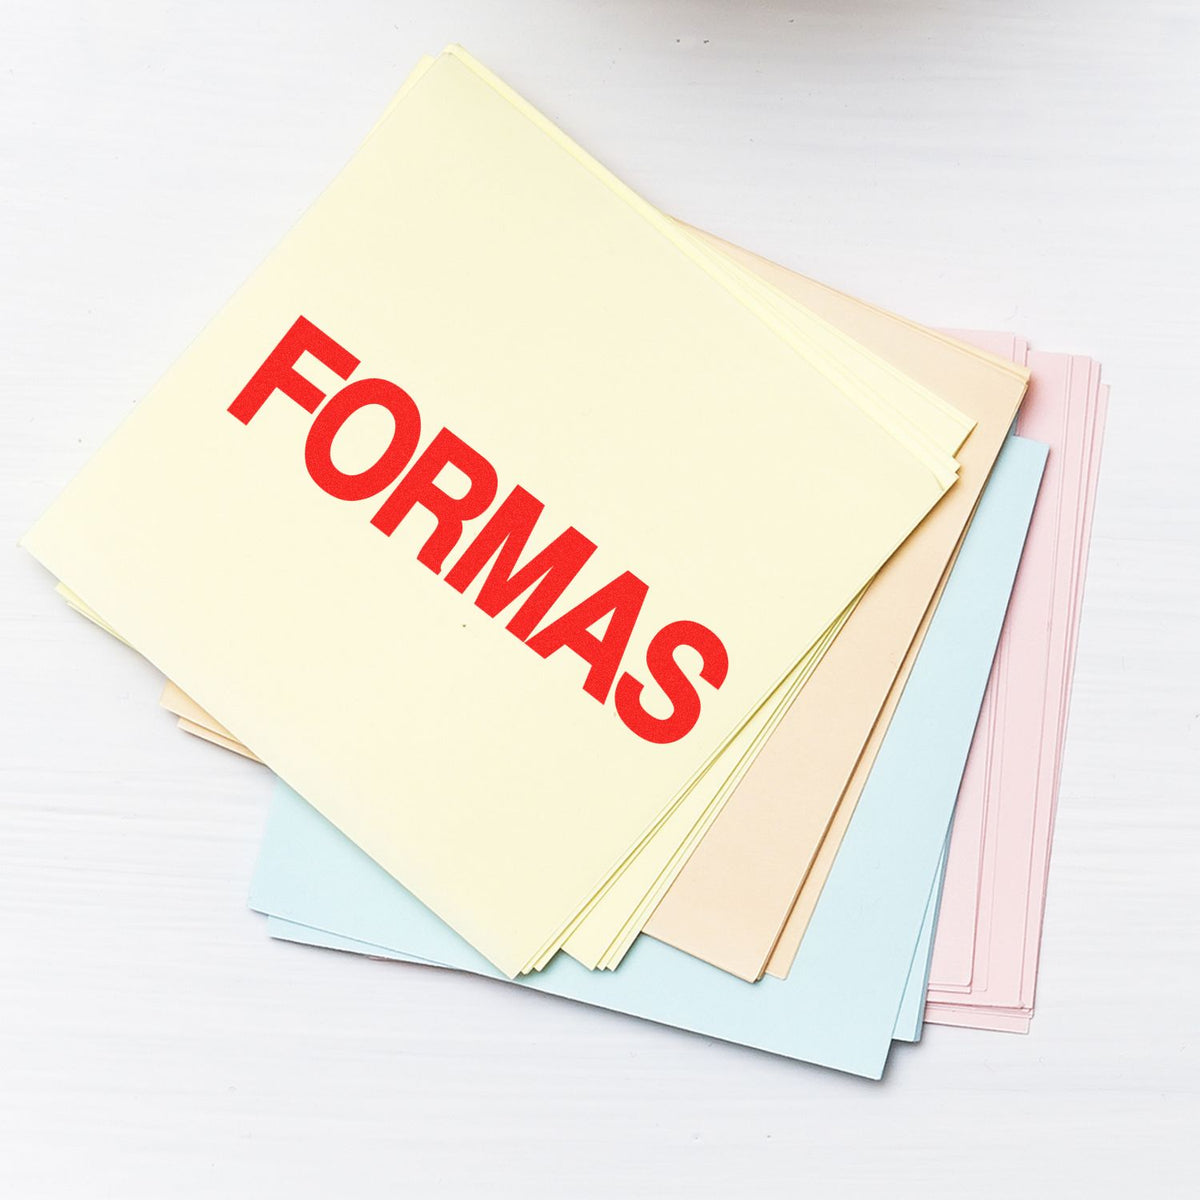 Large Formas Rubber Stamp In Use Photo